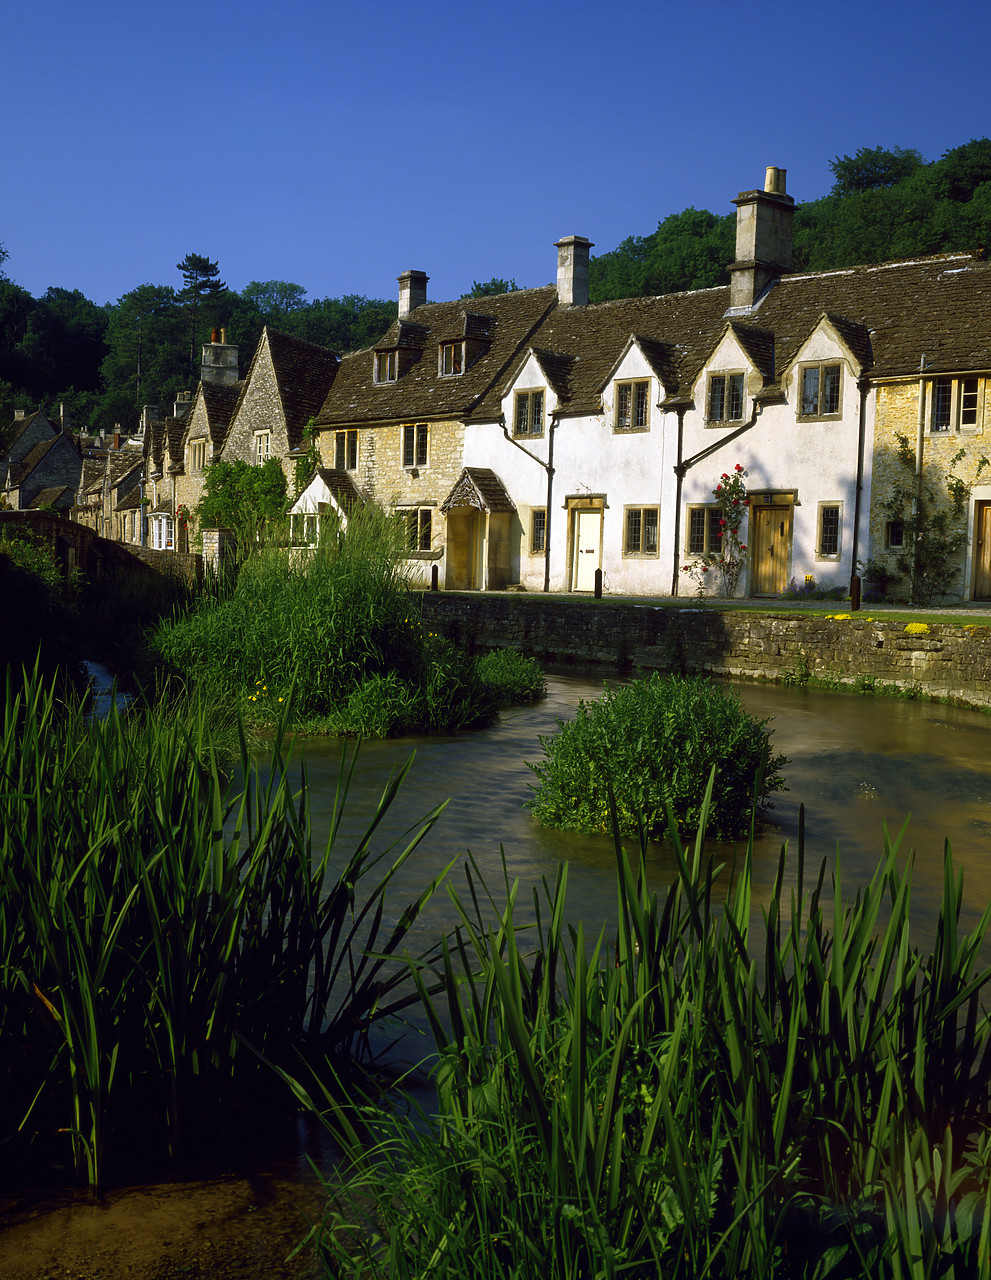 #85387 - Cottages at Castle Combe, Wiltshire, England